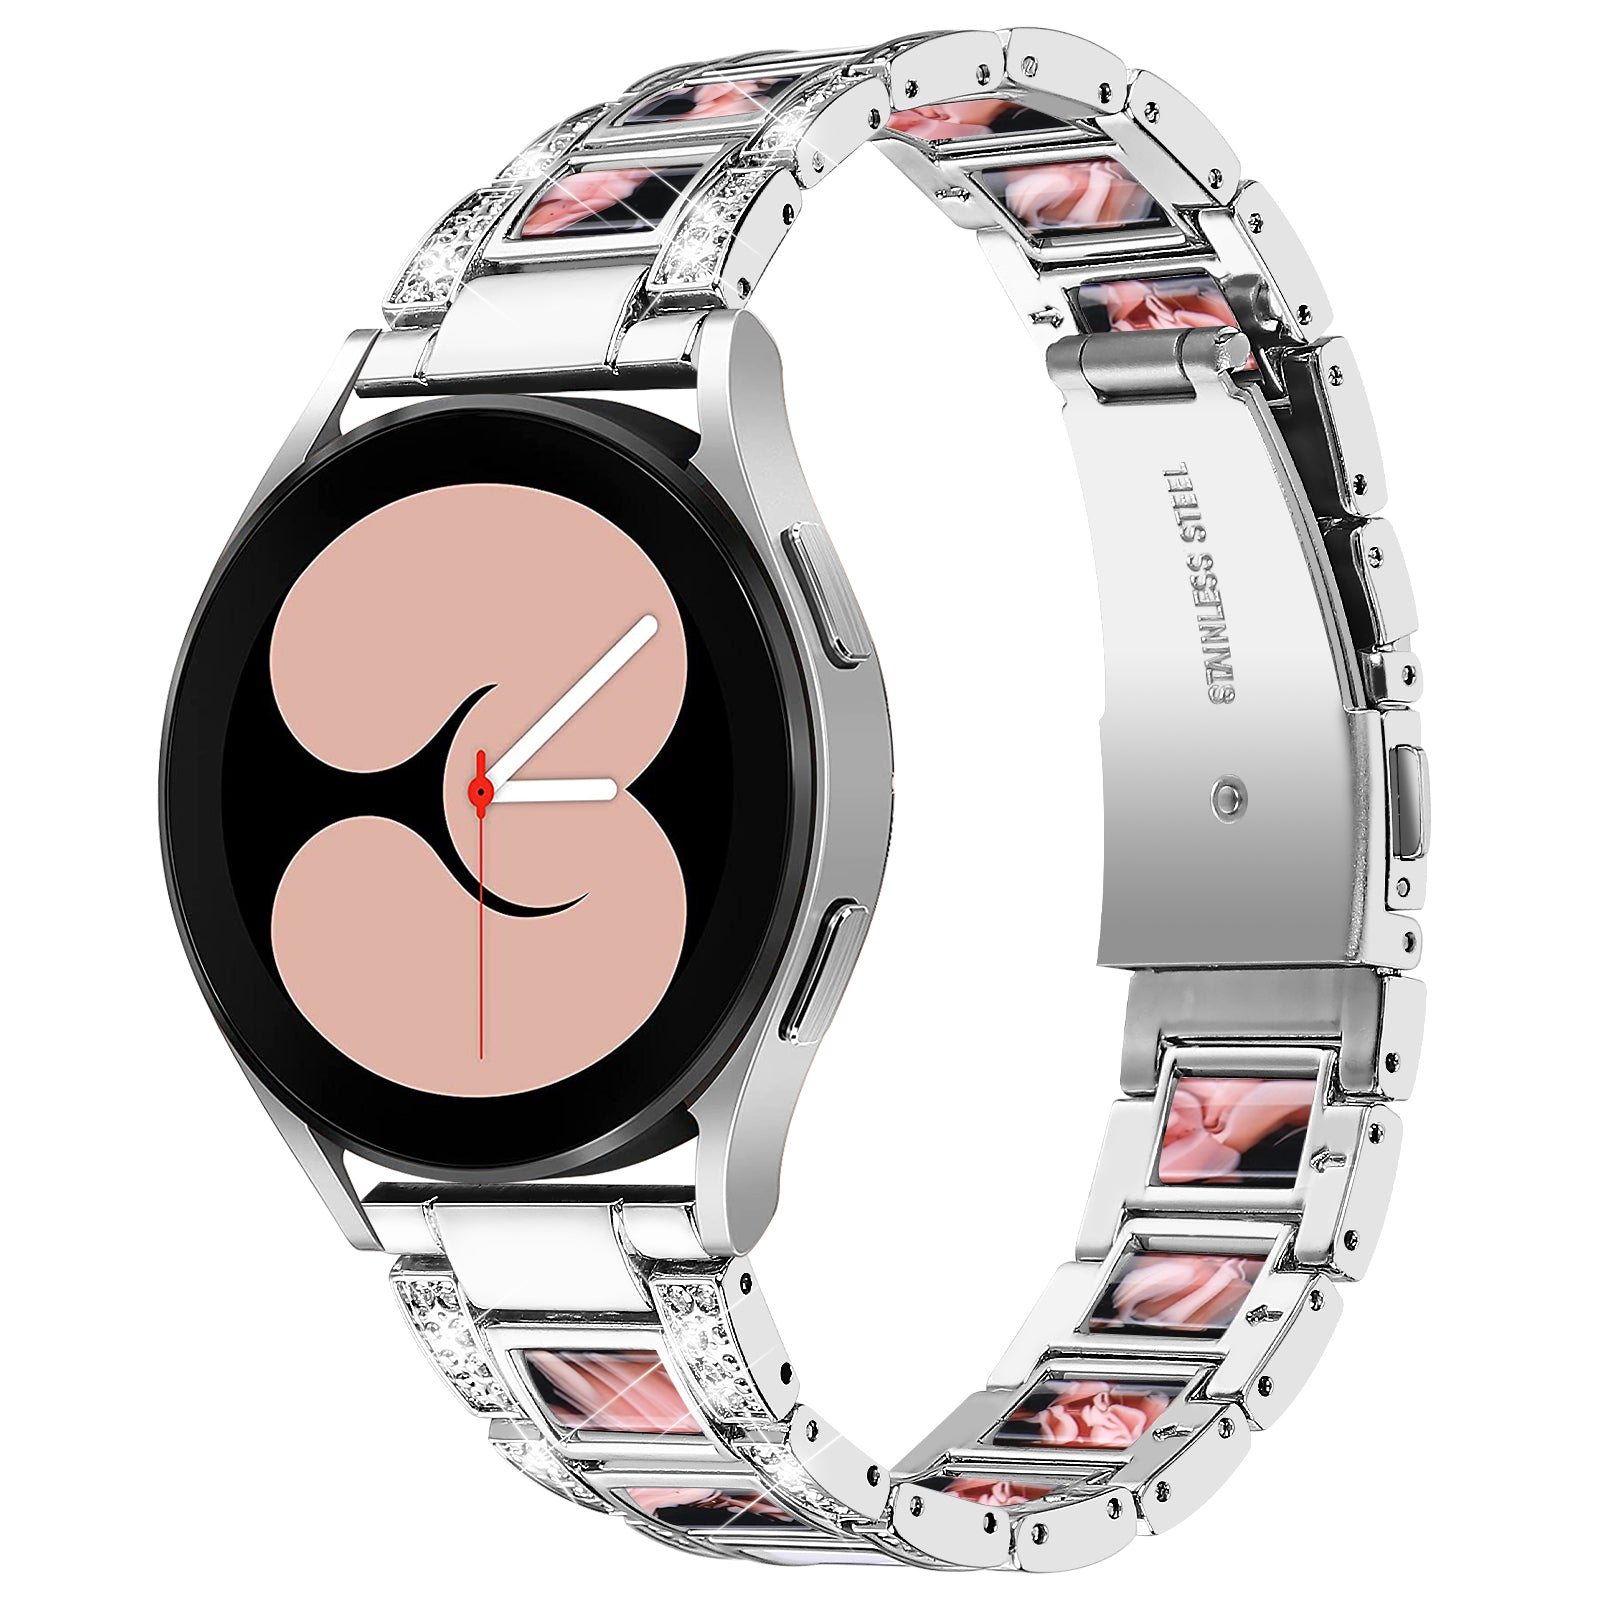 For Samsung Galaxy Watch4 Active 40mm/44mm/Watch4 Classic 42mm/46mm Stylish Rhinestone Decor Stainless Steel Resin Watch Band Wrist Strap - Silver/Black Pink Mix